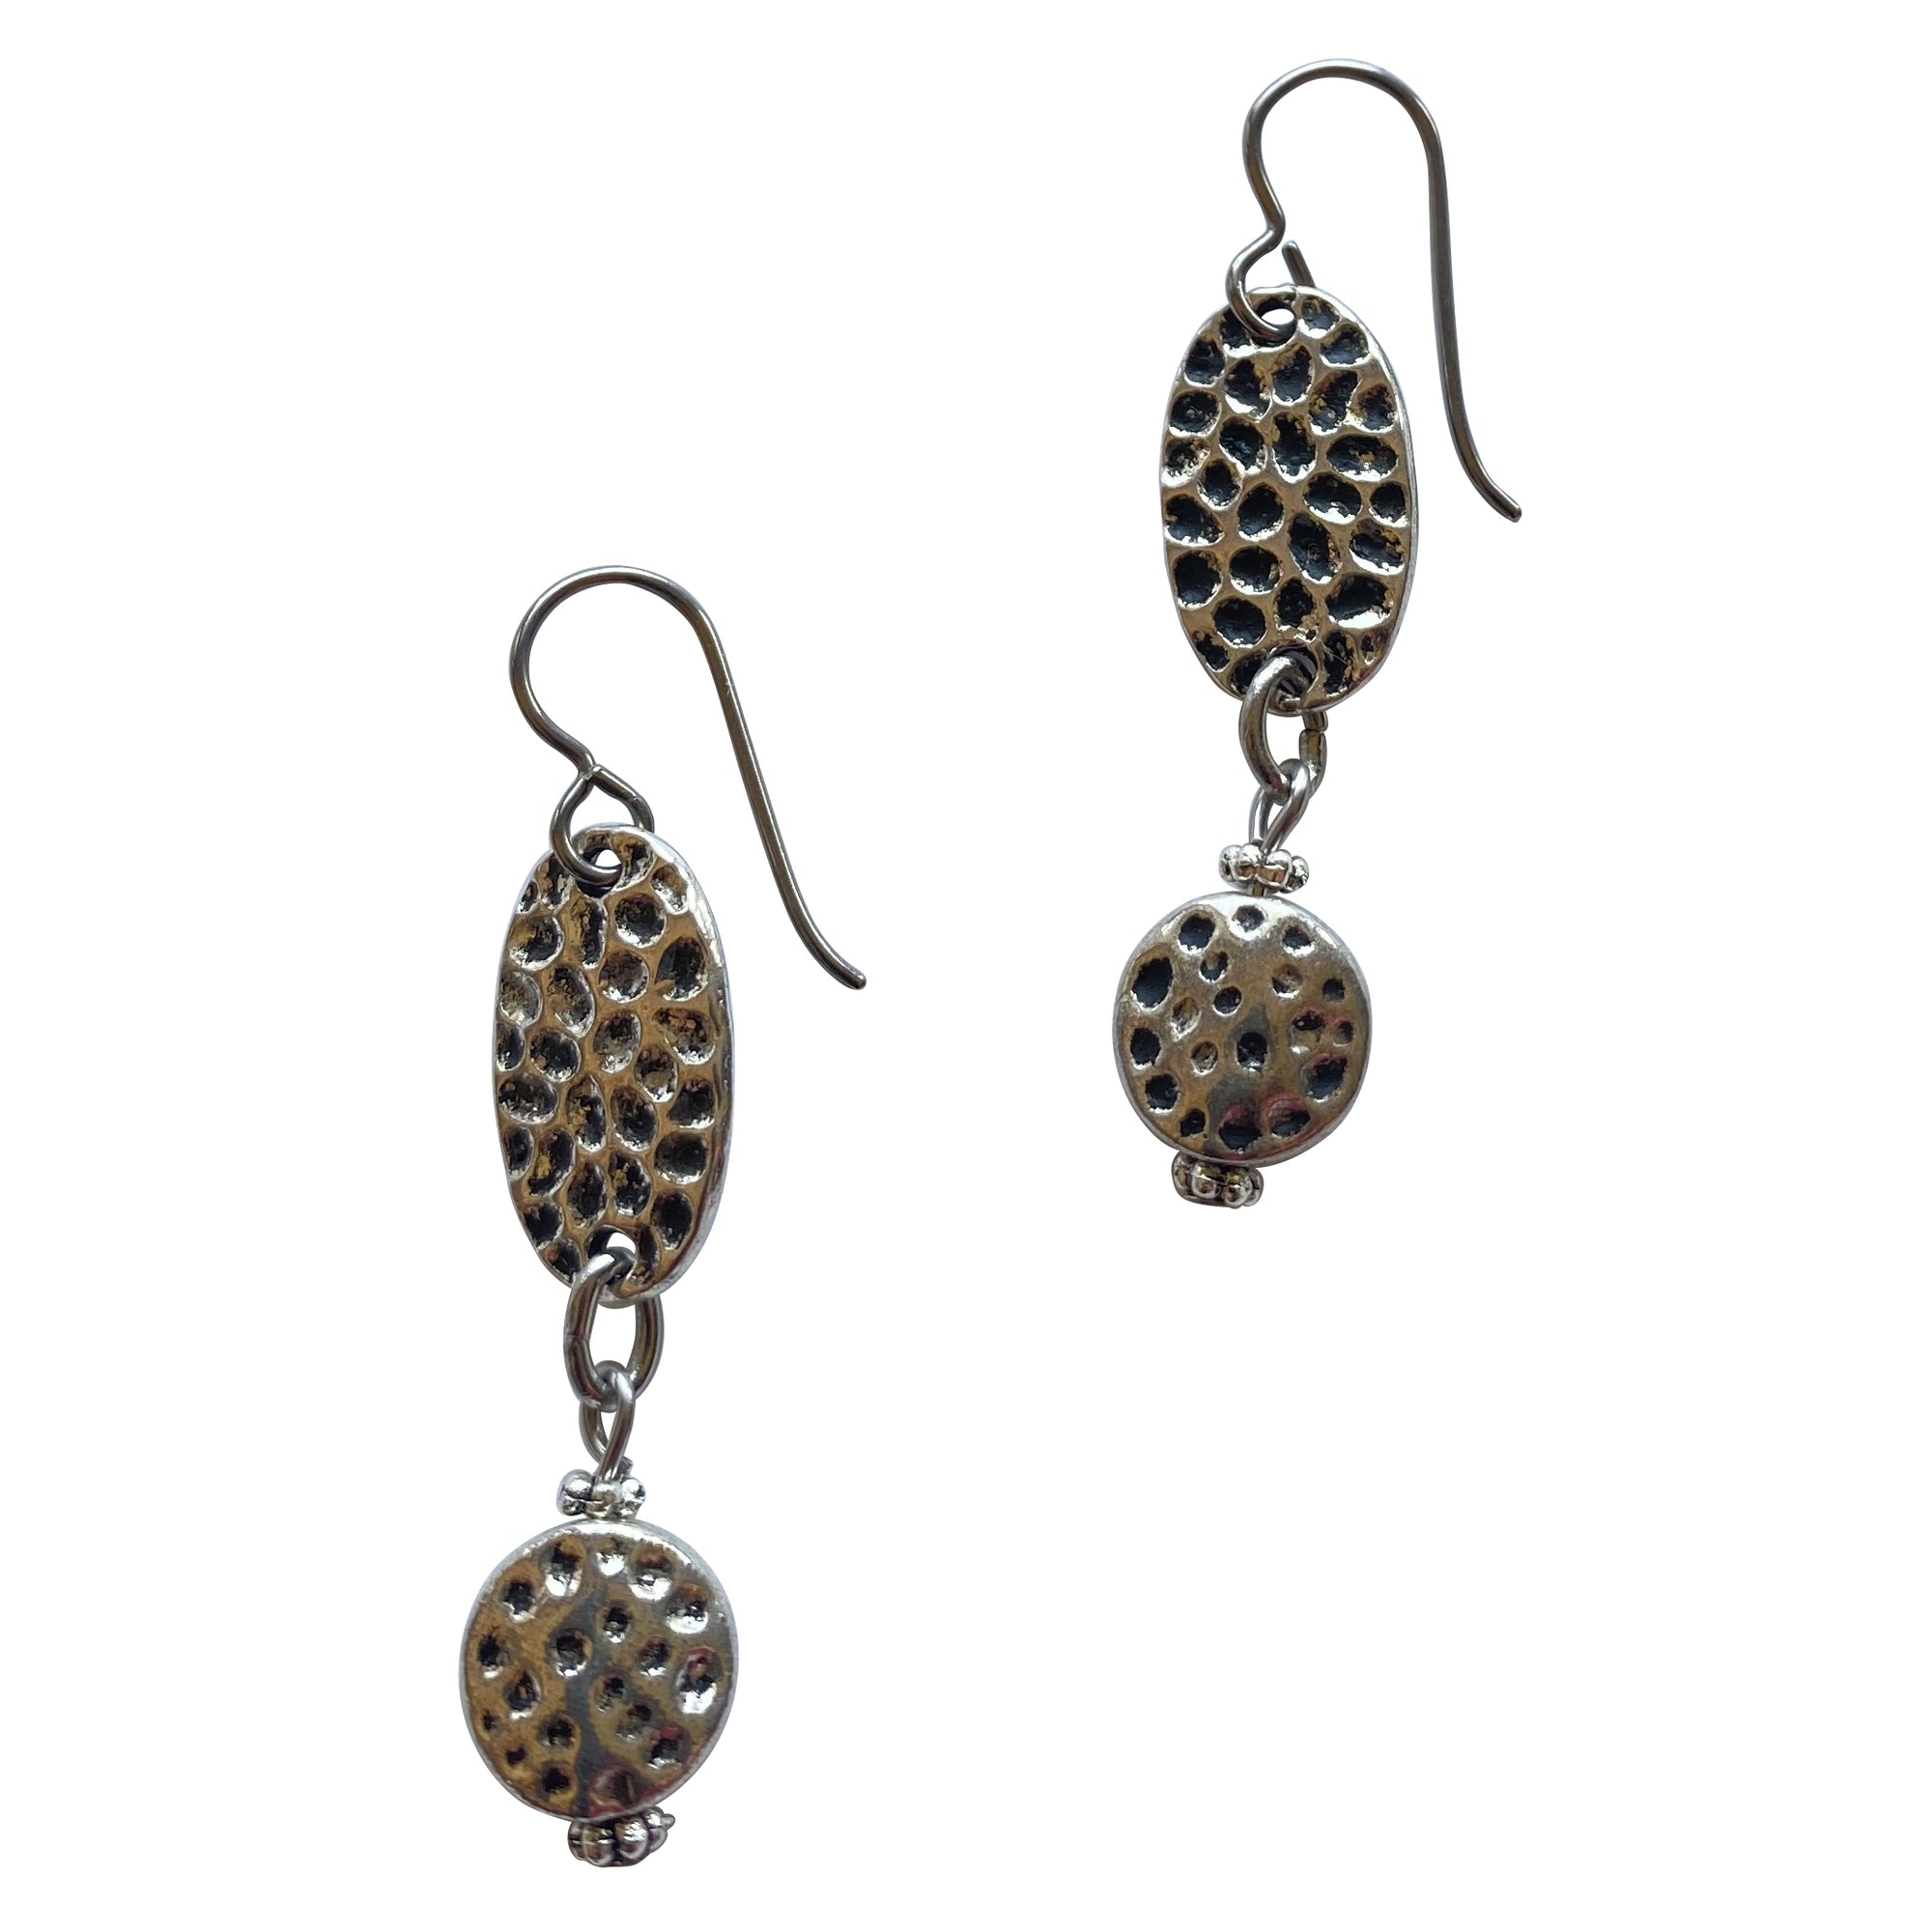 Pewter Silver Hammered Earrings for Sensitive Ears